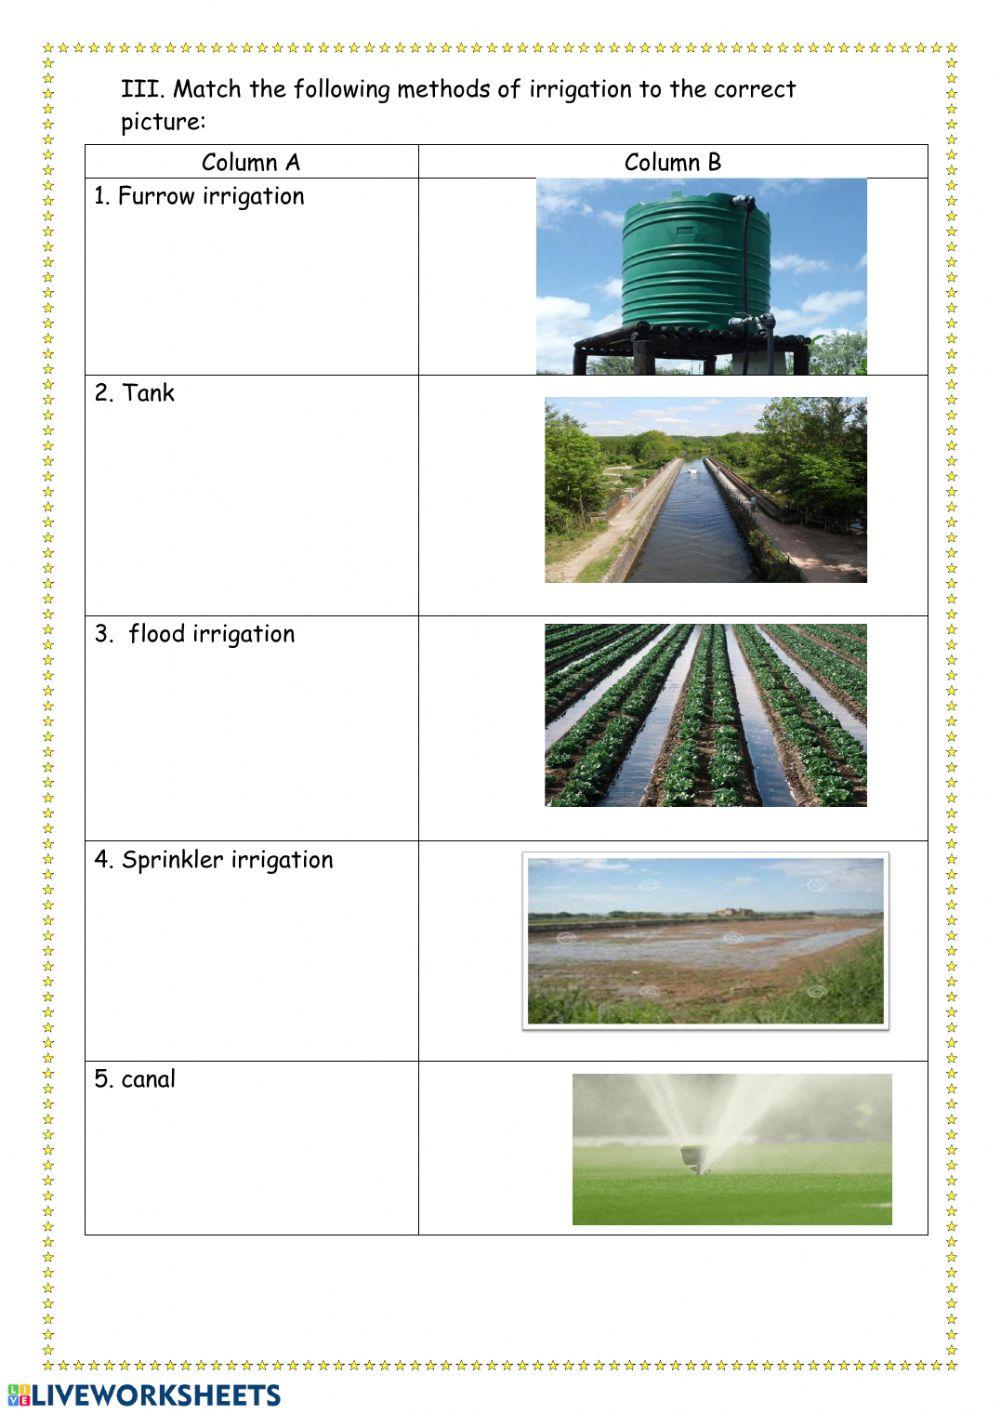 Water and methods of irrigation